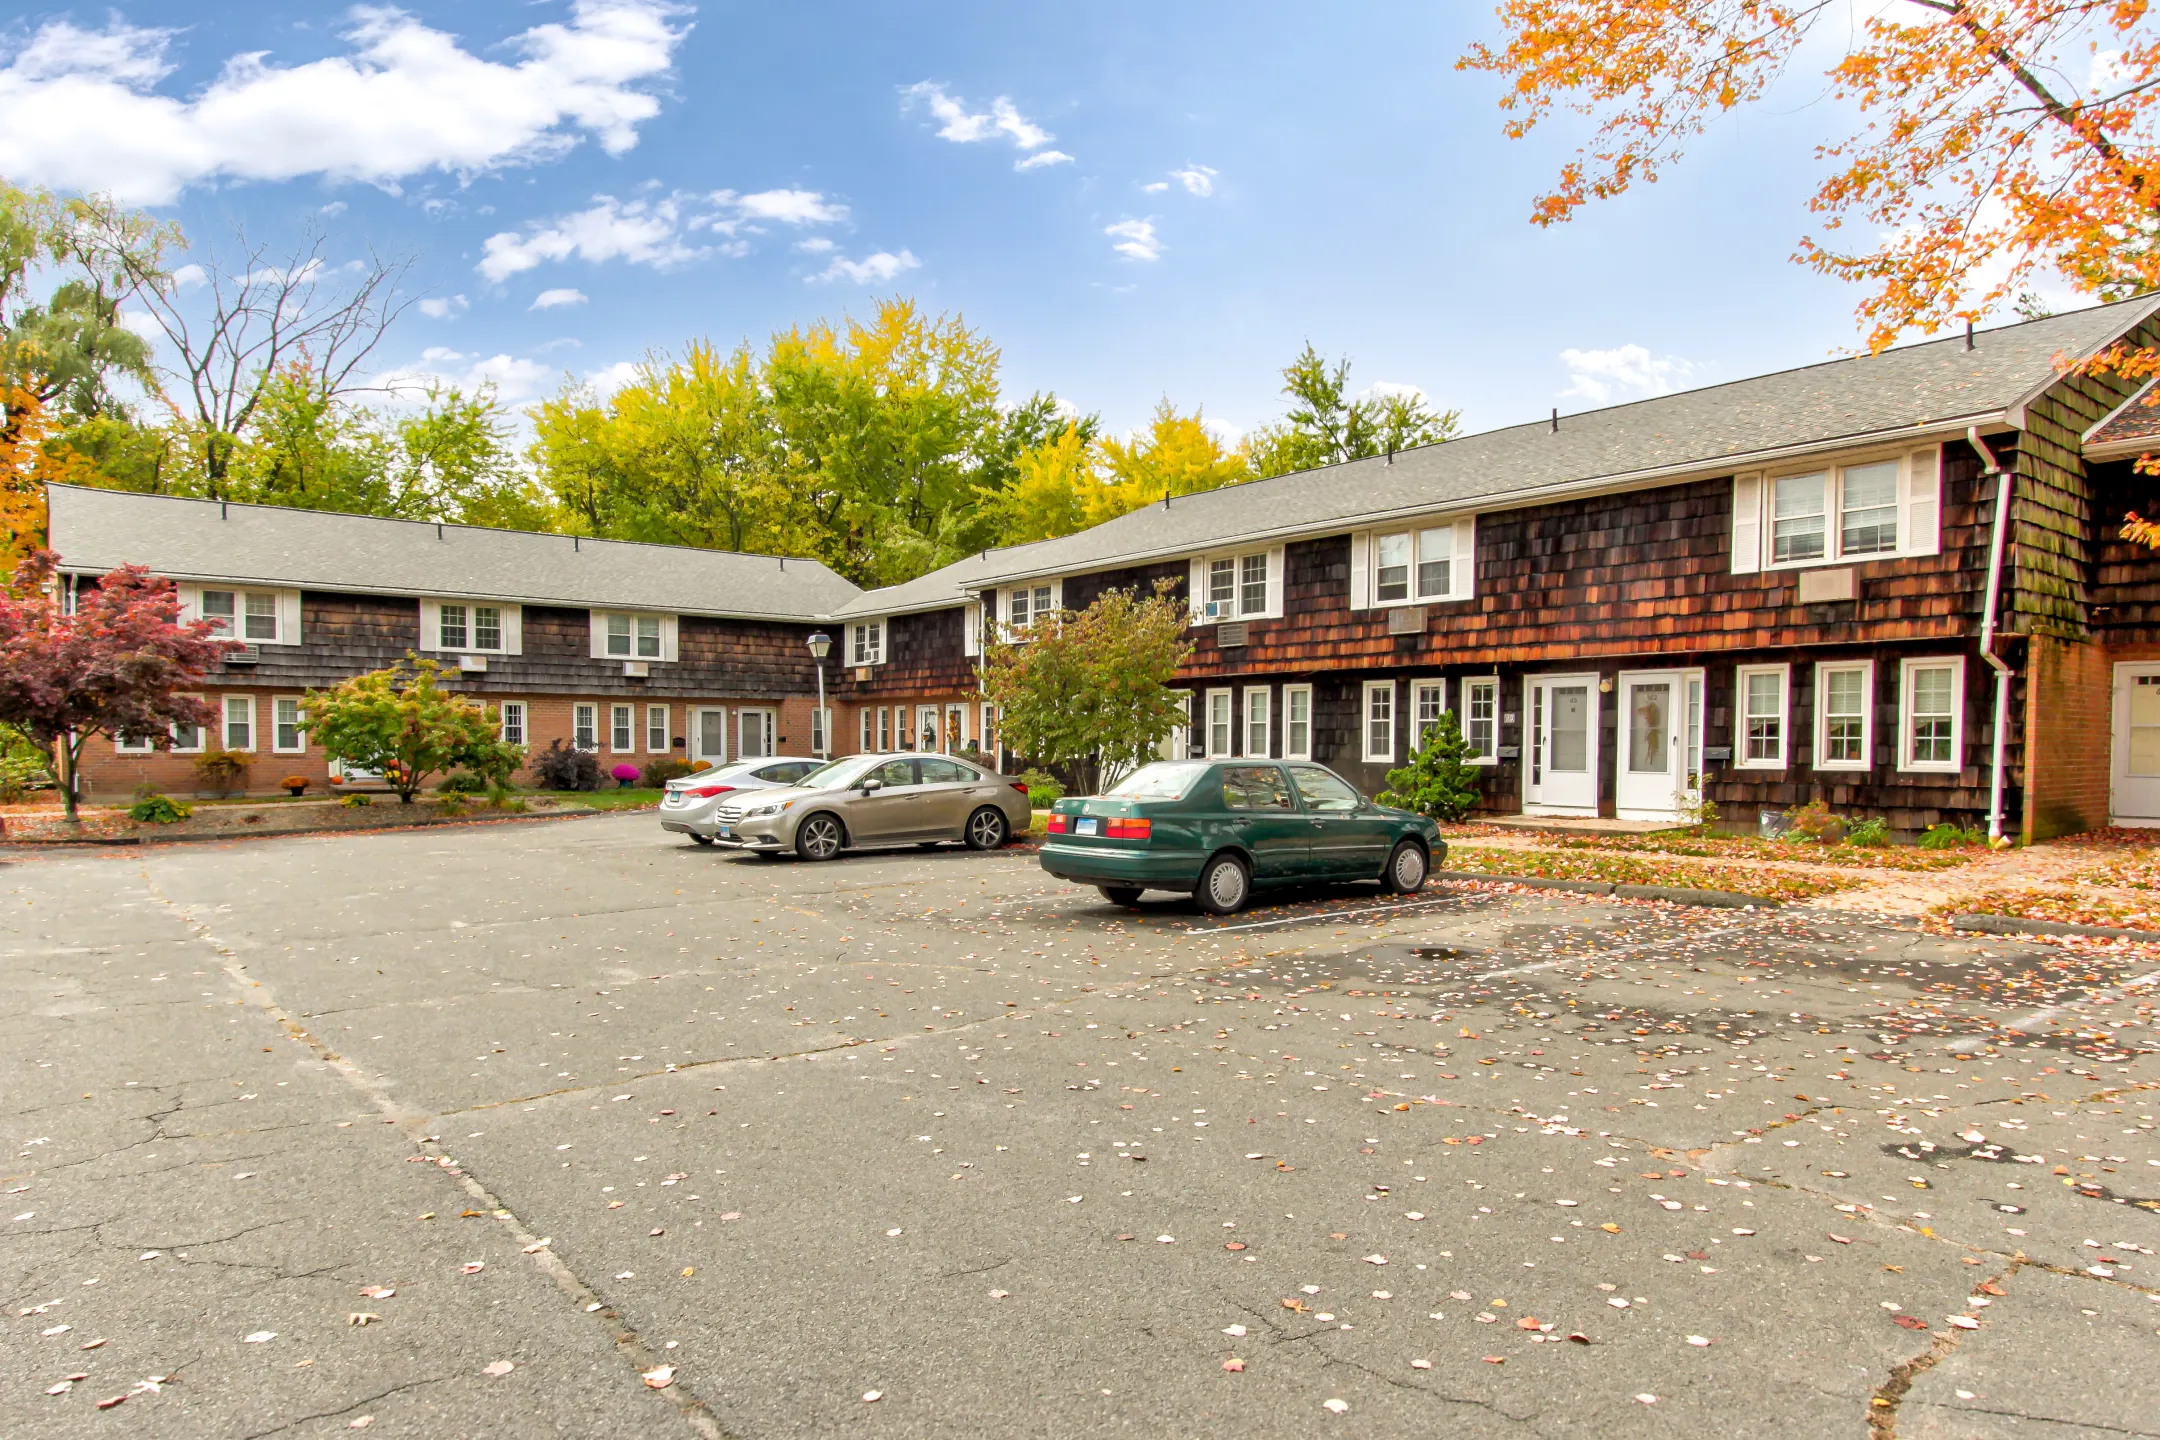 Suffield West Apartments - Suffield, CT